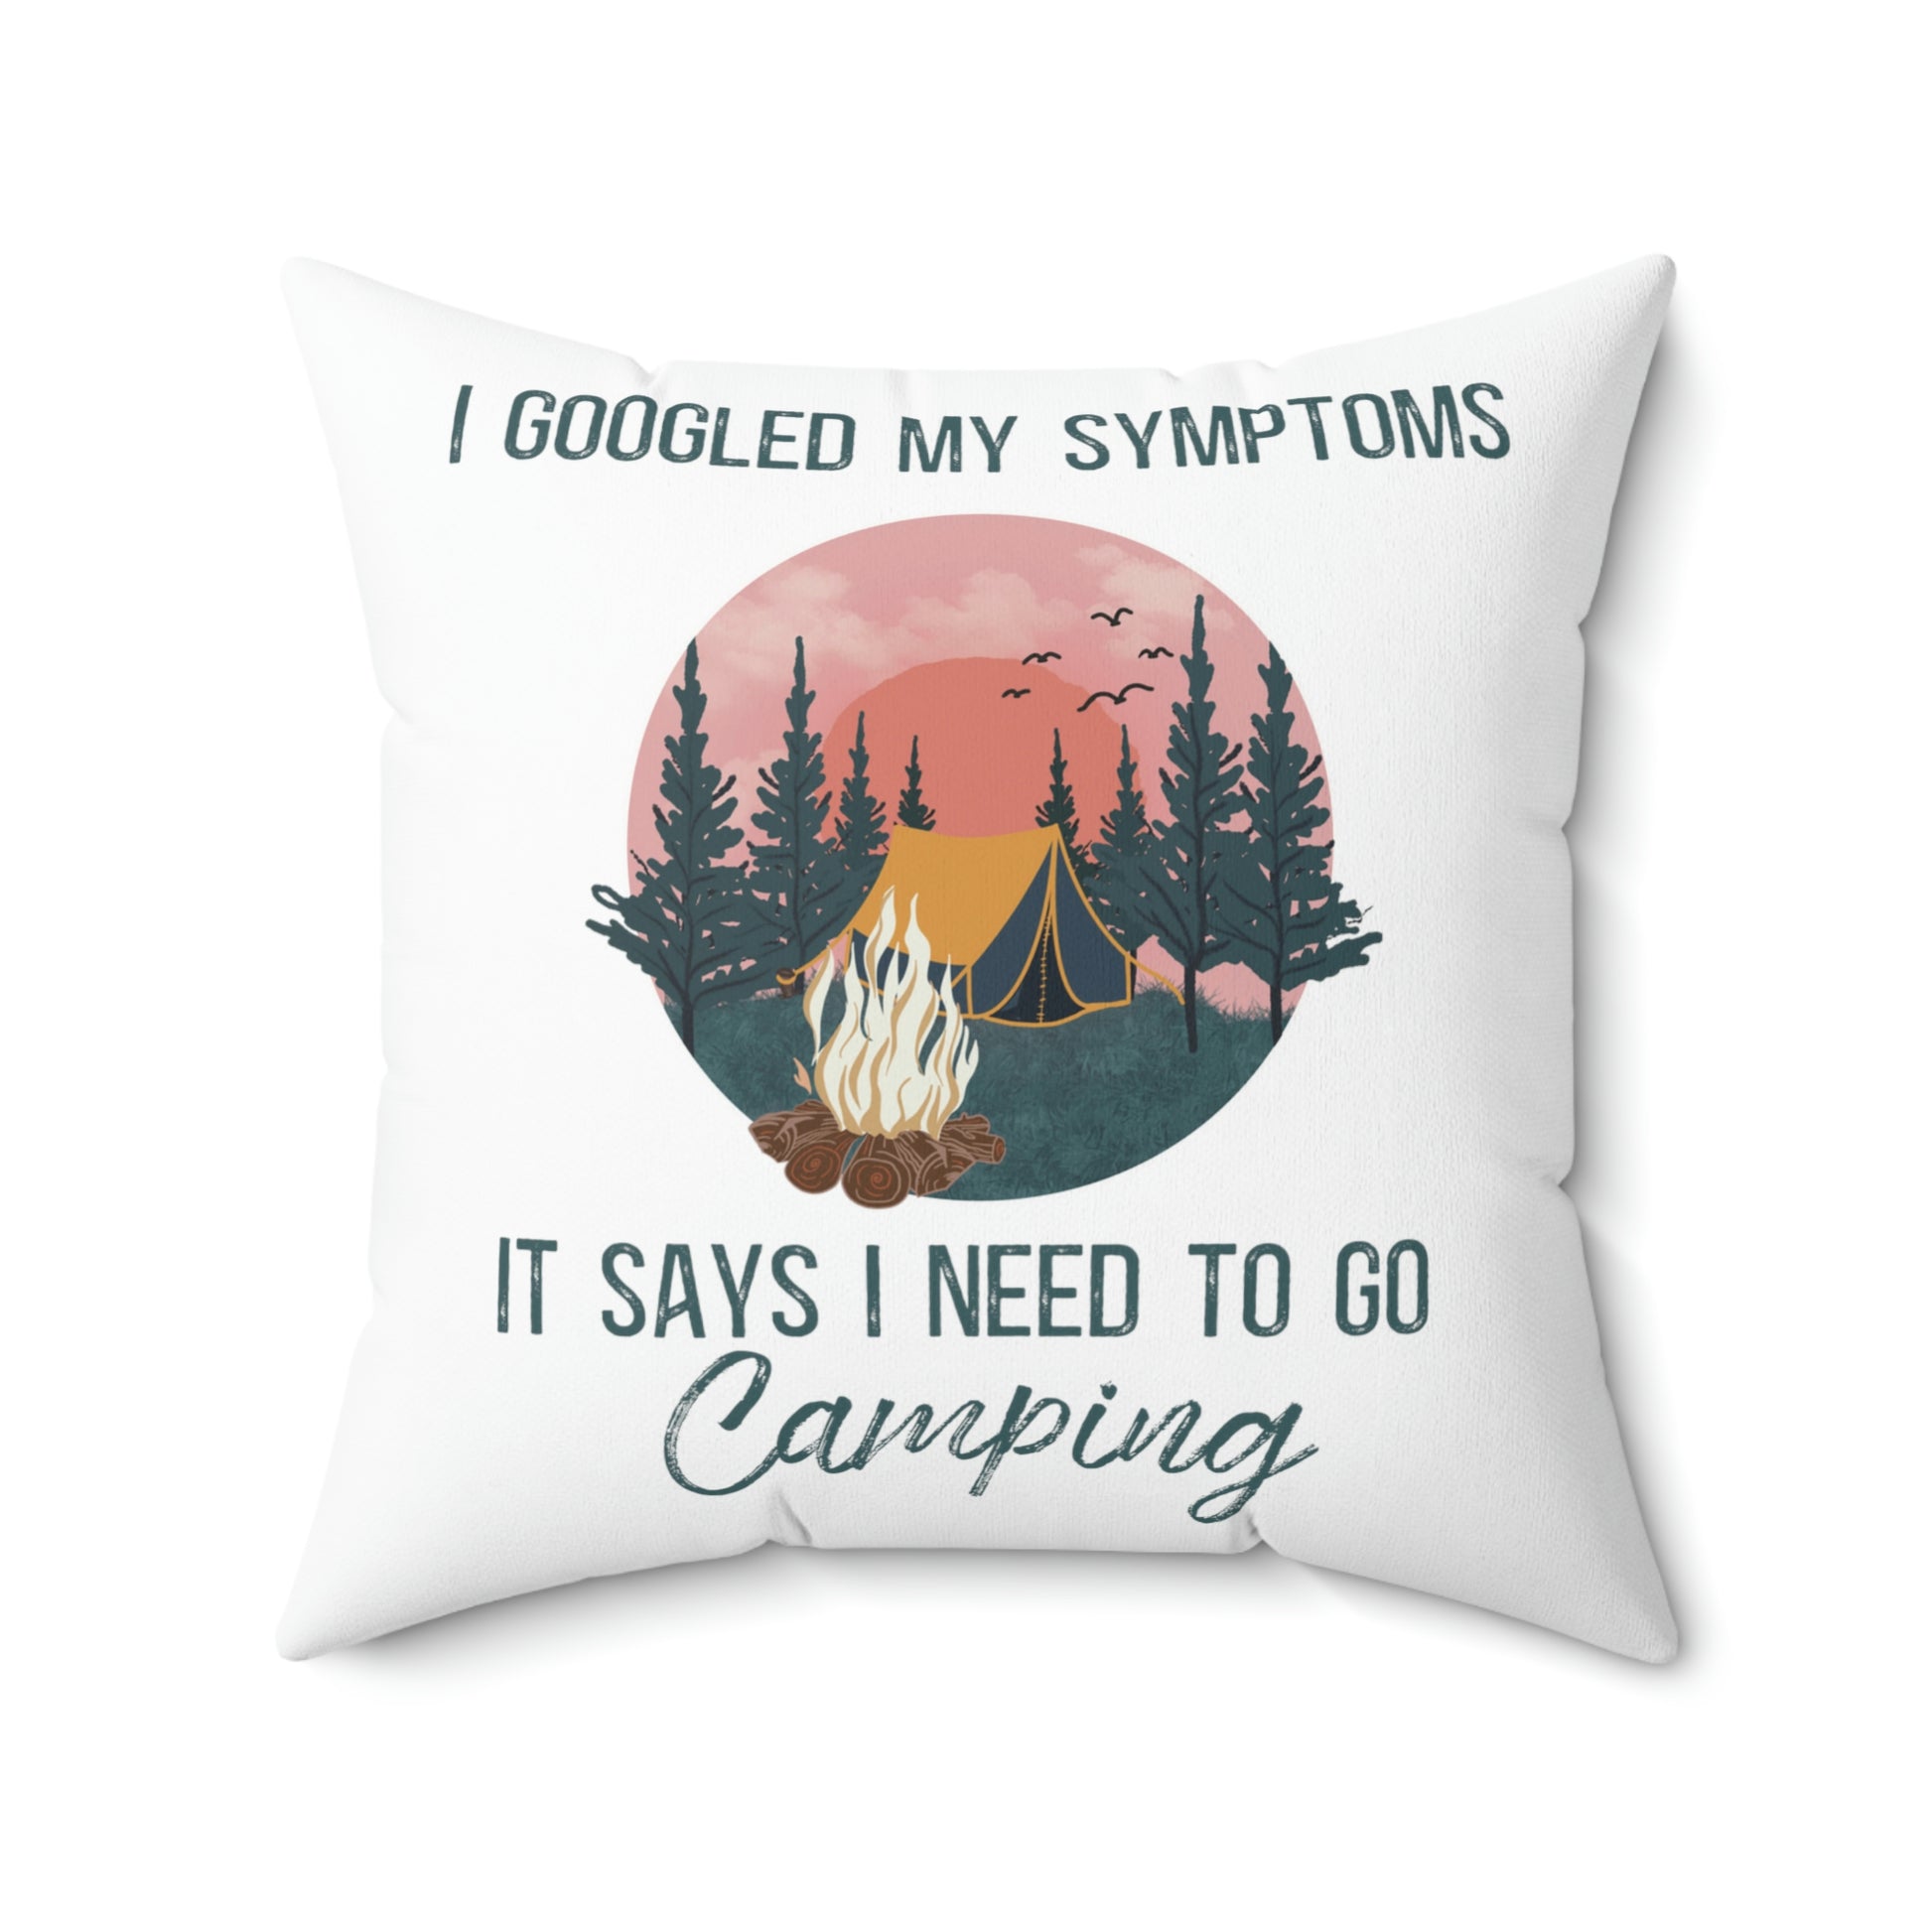 "Google Says I Need To Go Camping" Throw Pillow - Weave Got Gifts - Unique Gifts You Won’t Find Anywhere Else!